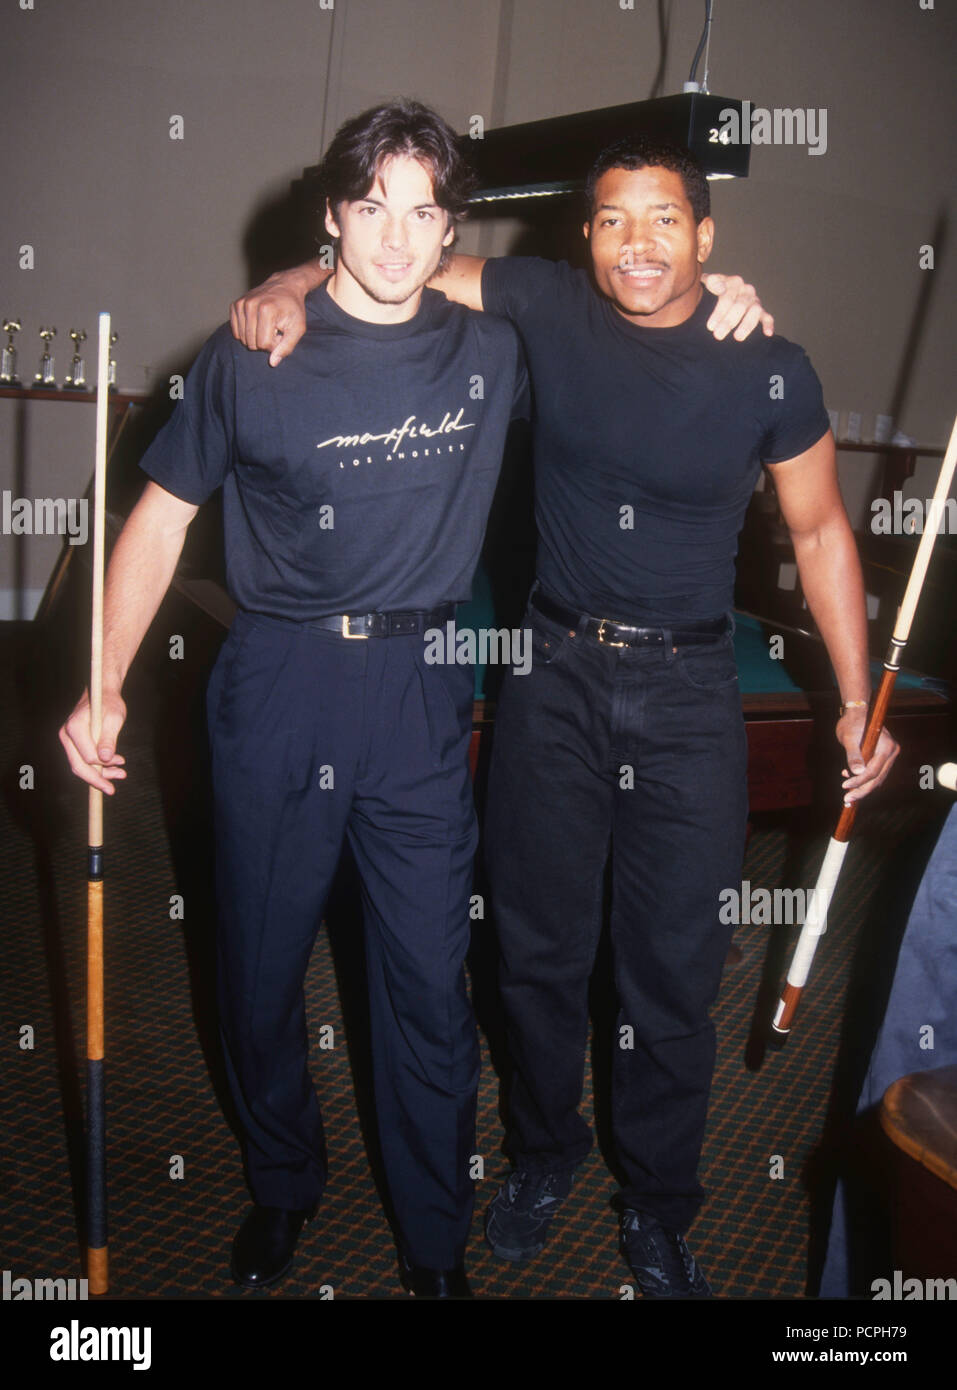 HOLLYWOOD, CA - MAY 30: Actor Jason Gedrick and Rapper Young MC attend the First Annual Celebrity Pool Tournament to Benefit AIDS Project Los Angeles (APLA) on May 30, 1992 at the Hollywood Athletic Club in Hollywood, California. Photo by Barry King/Alamy Stock Photo Stock Photo